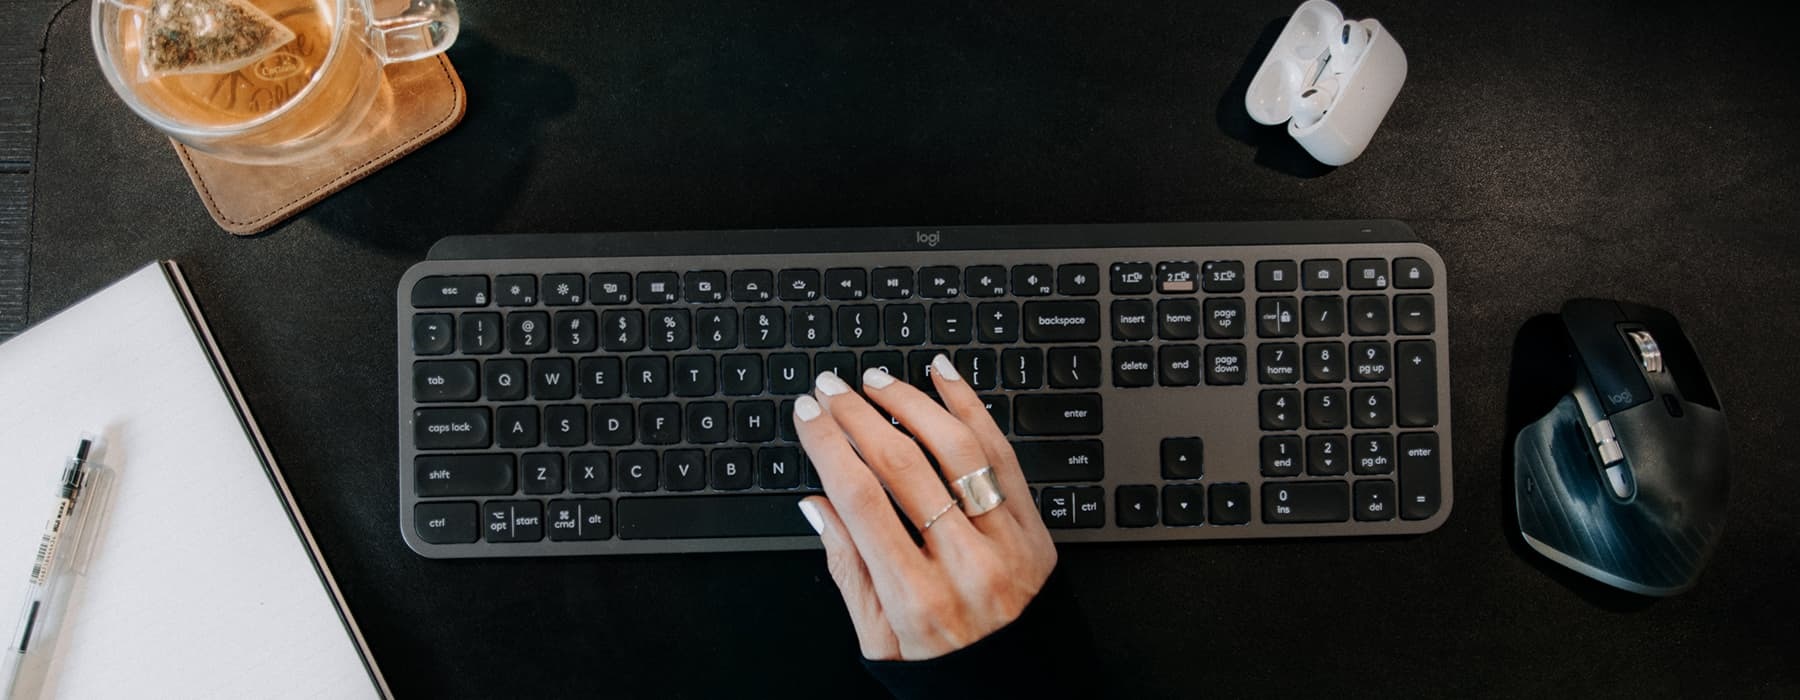 lifestyle image of a woman's hand typing on a keyboard